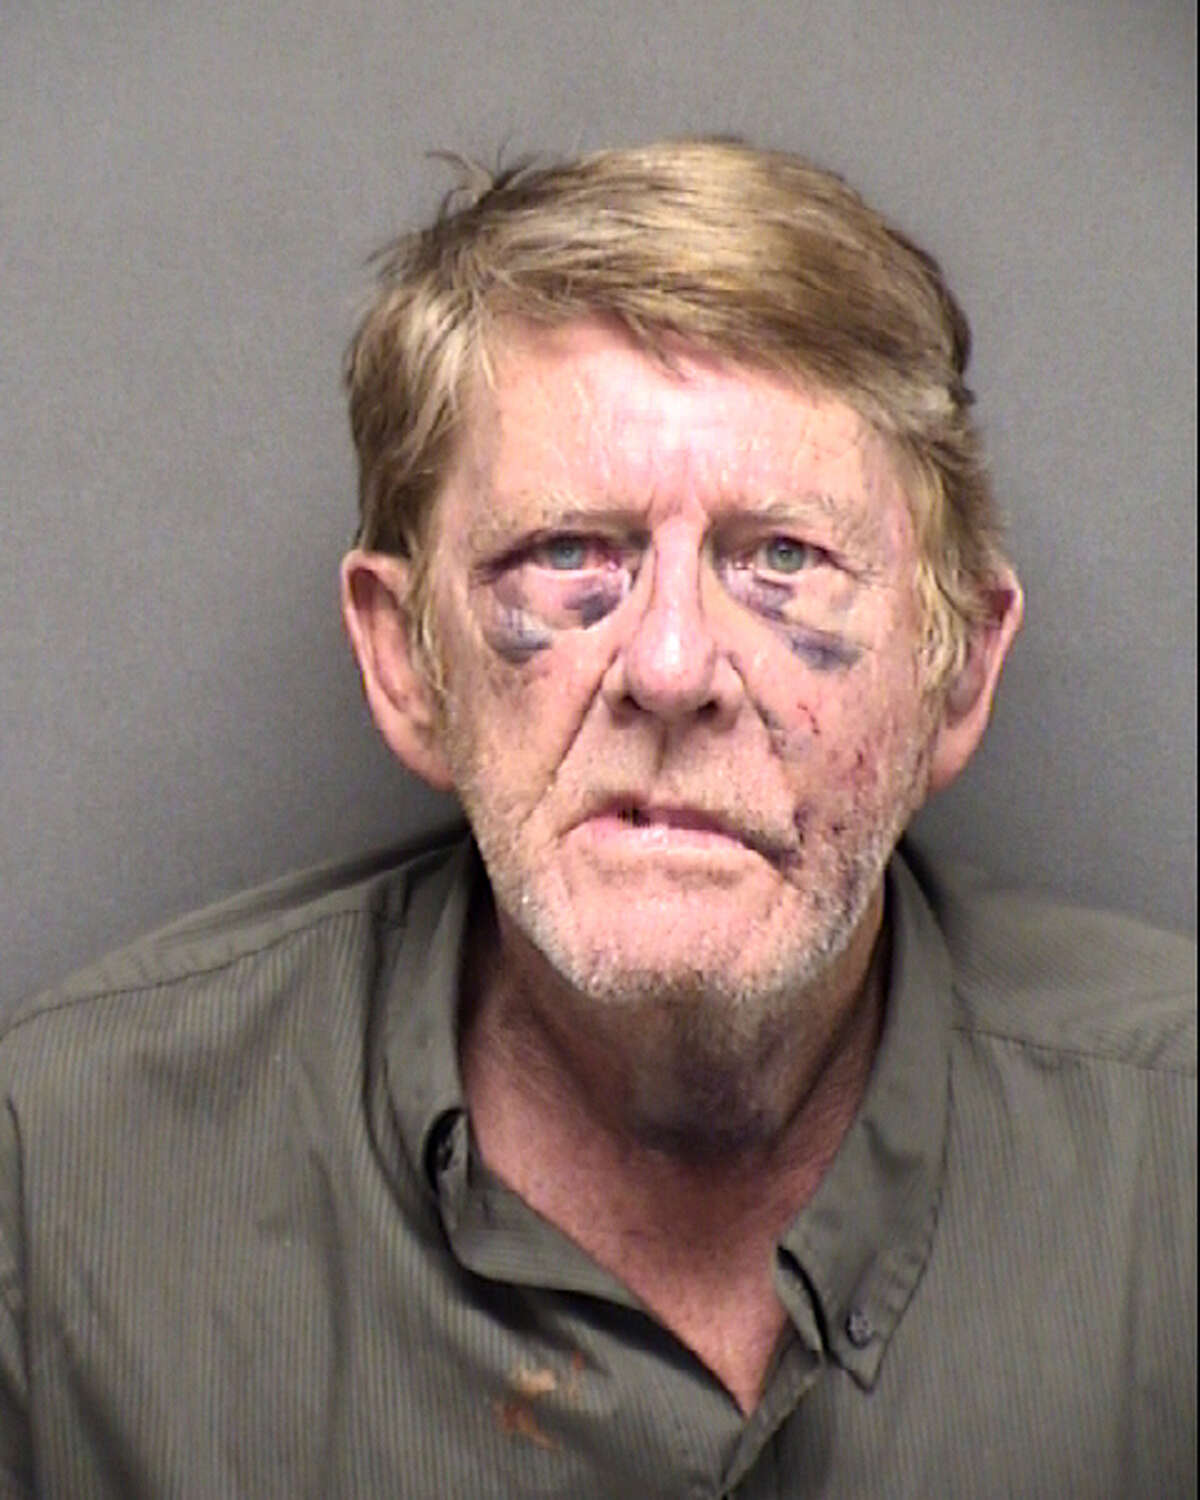 Gerald Allen Young, 66, was arrested Wednesday evening and is facing a murder charge despite claiming he was using self-defense when he allegedly stabbed his 55-year-old roommate on the Northwest Side on Tuesday.